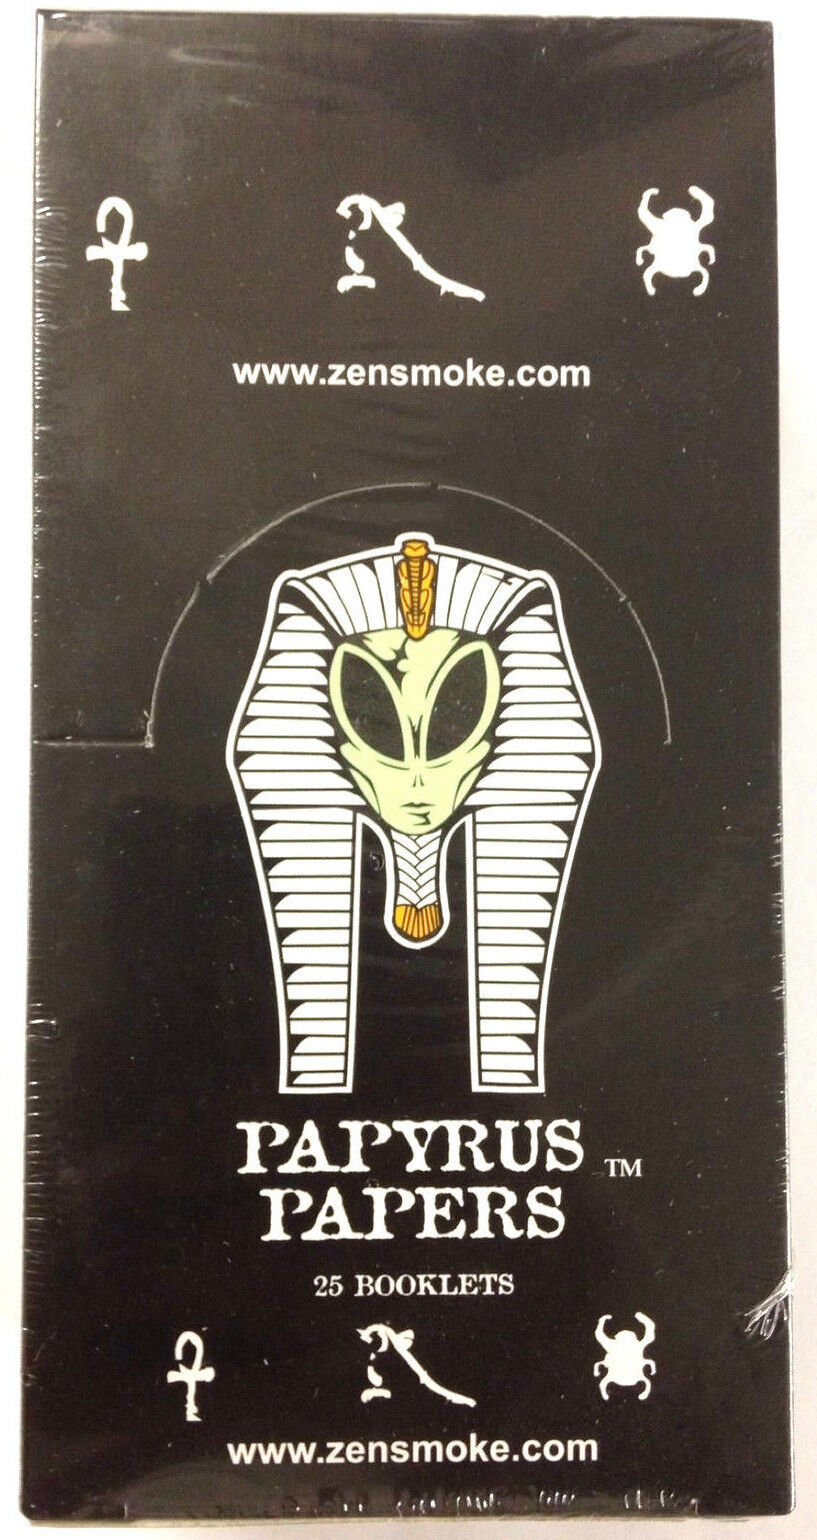 25 packs Papyrus 1.5 size imprinted cigarette rolling papers Egypt, ufo, alien